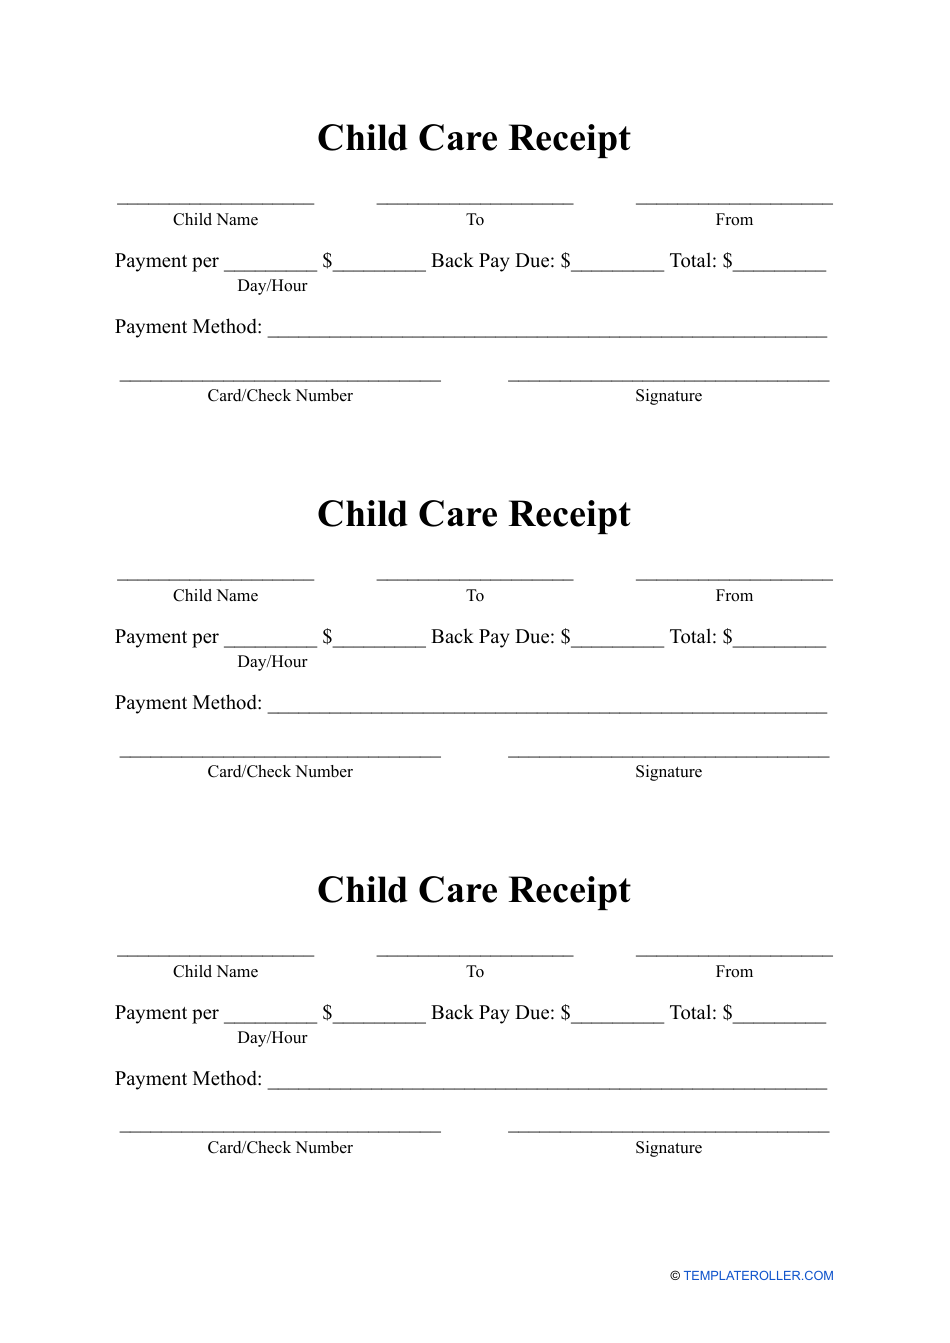 Child Care Receipt Template Fill Out, Sign Online and Download PDF